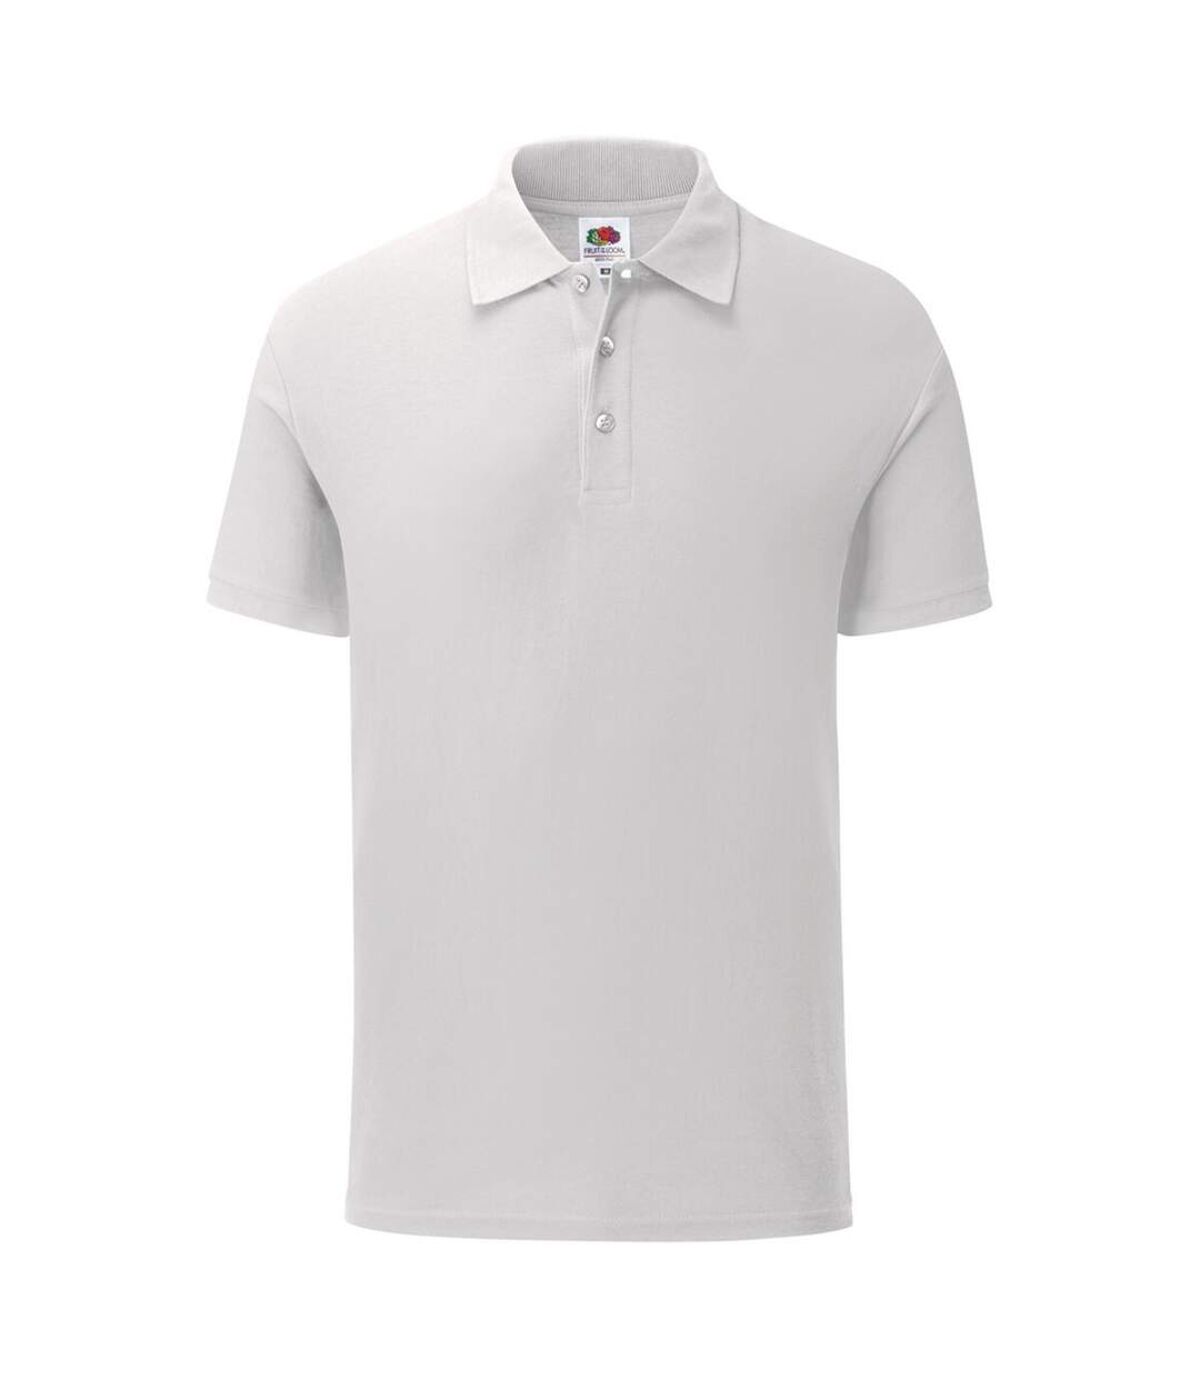 Fruit Of The Loom Mens Tailored Poly/Cotton Piqu Polo Shirt (White) - UTPC3572